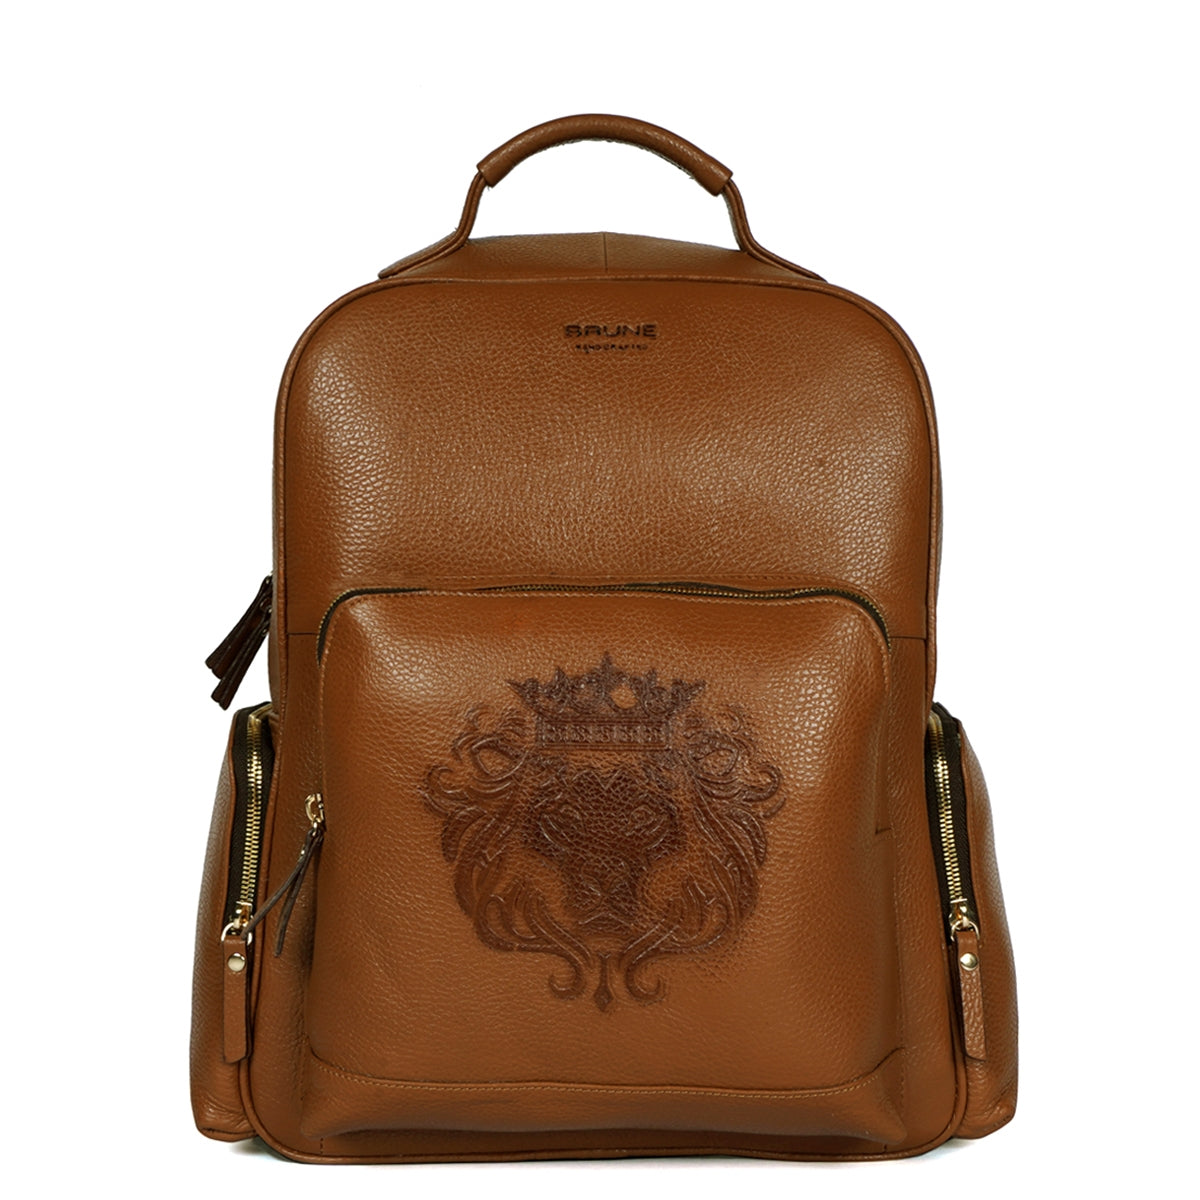 Perfect Handmade Large Tan Backpack Textured Leather Signature Lion by Brune & Bareskin